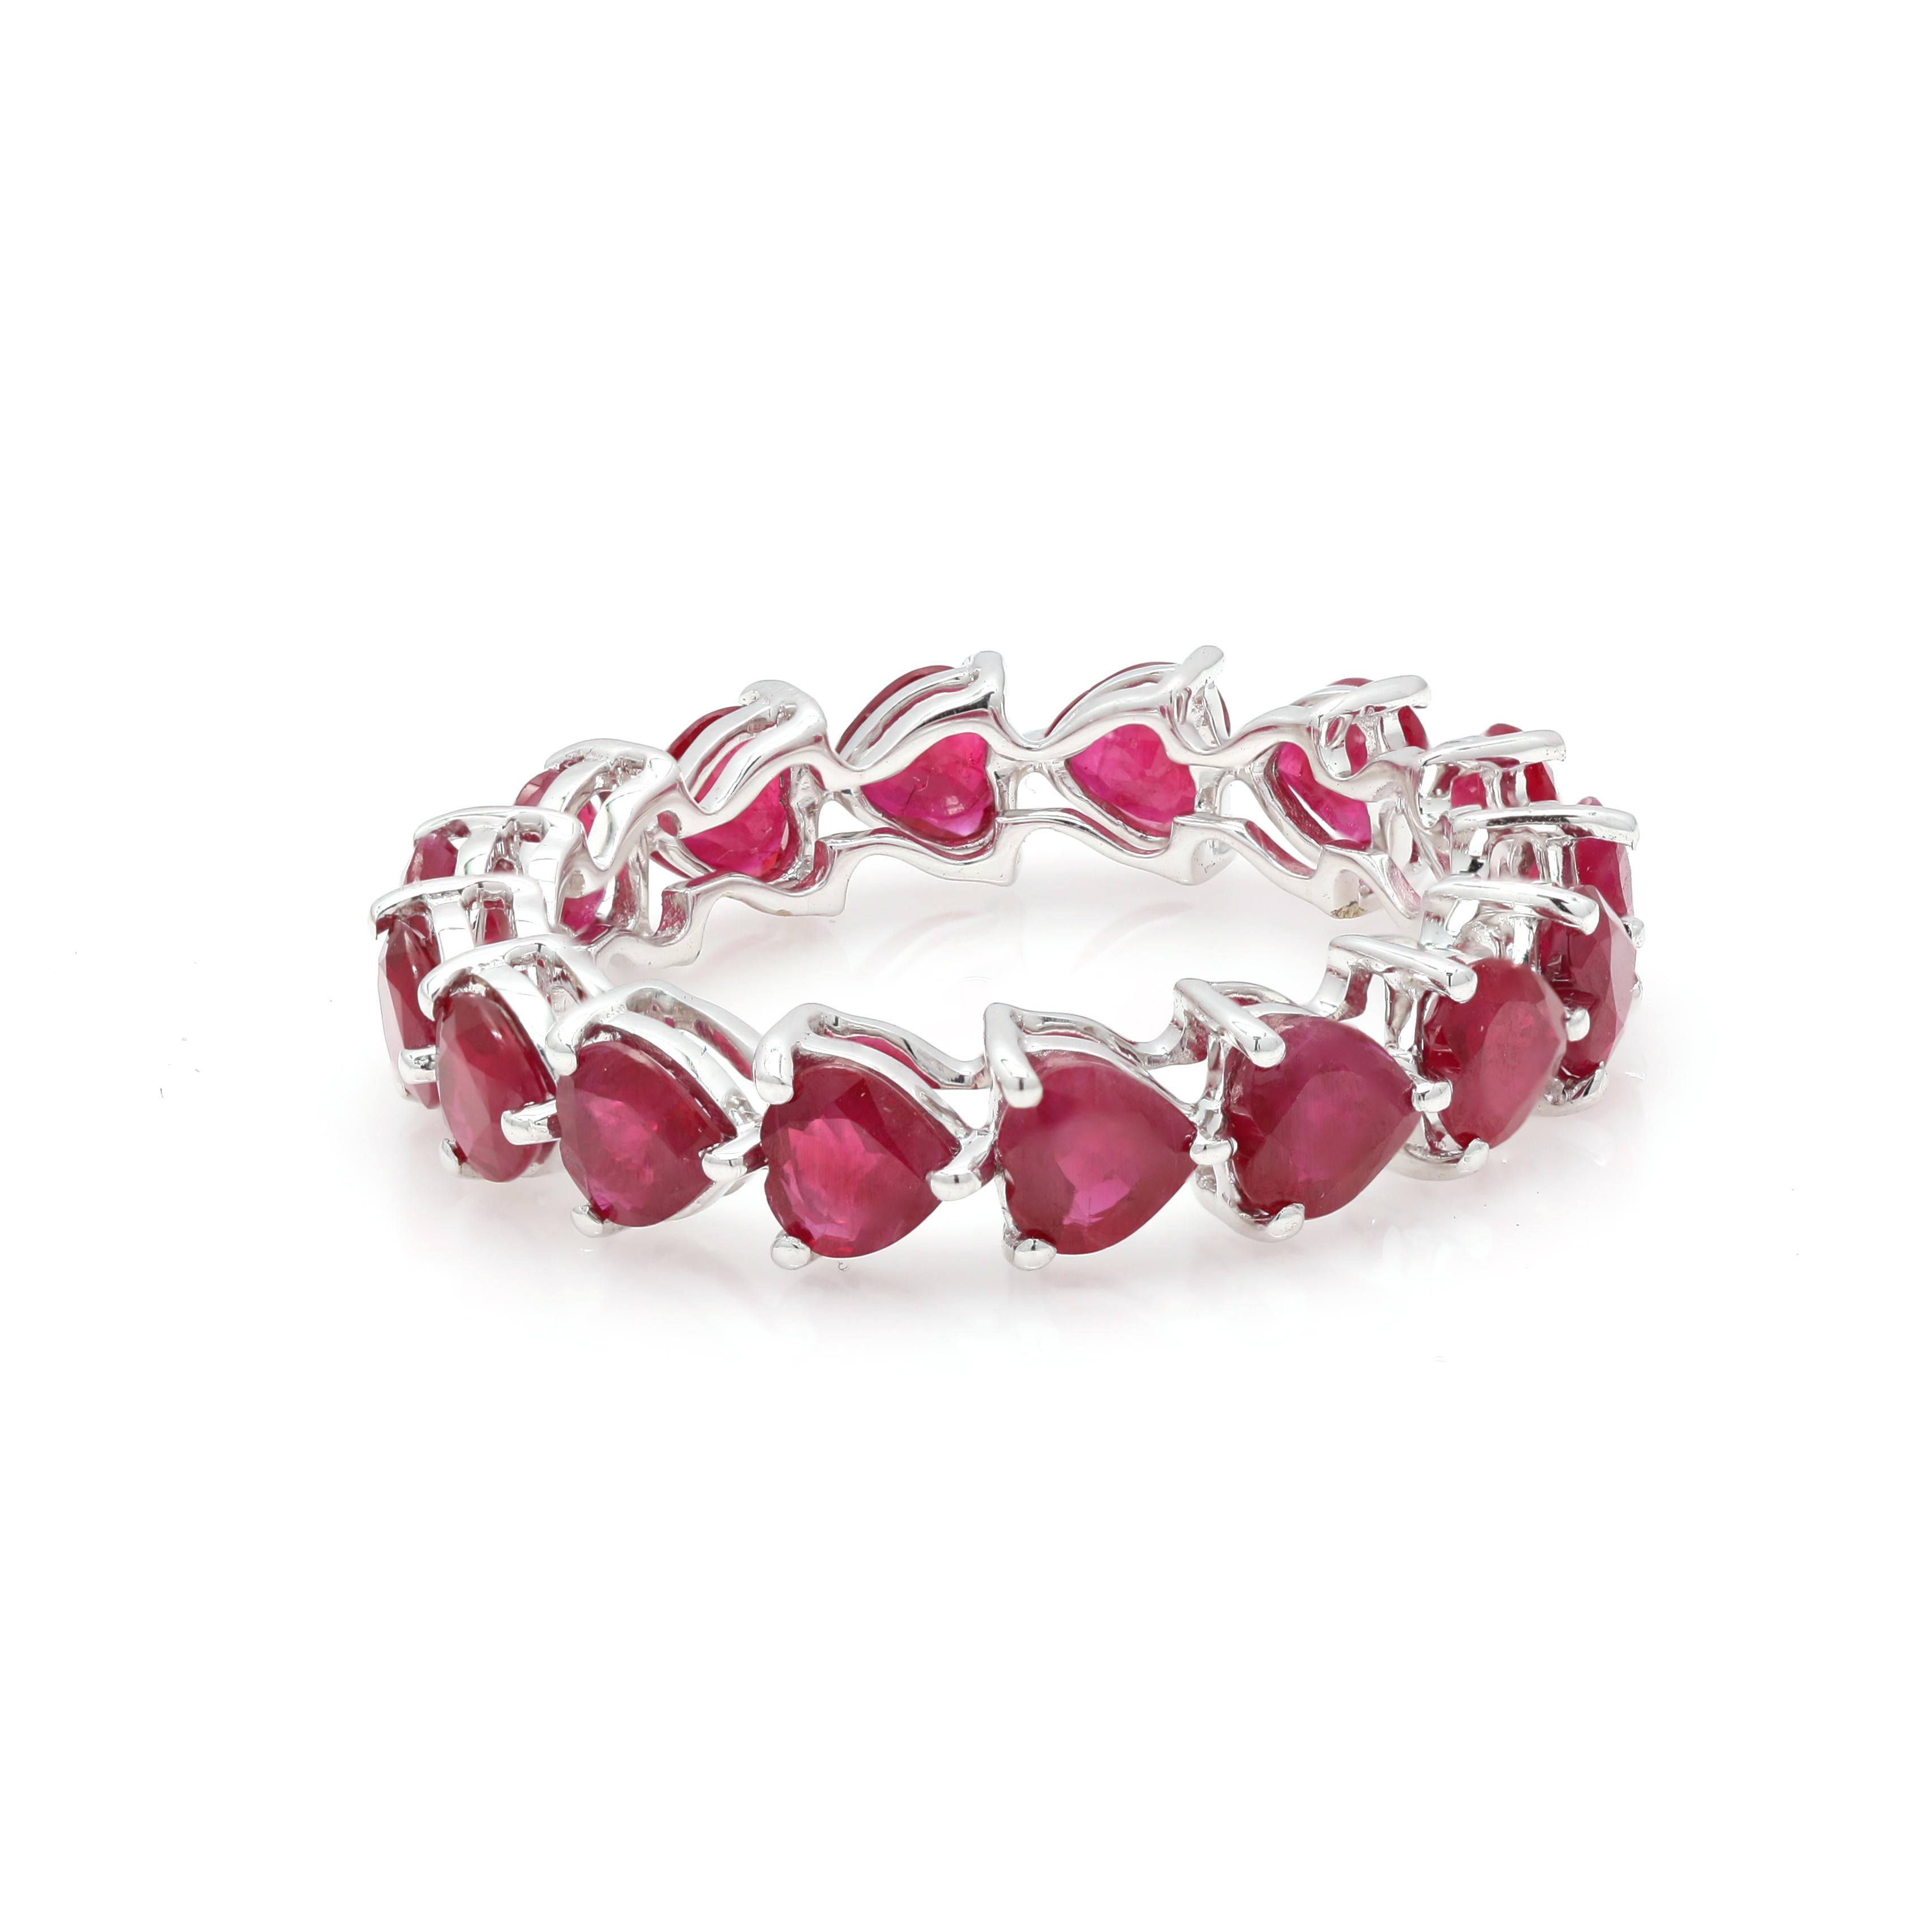 For Sale:  4.41 Carat Ruby Eternity Band, 18K White Gold Ruby Band Ring 3